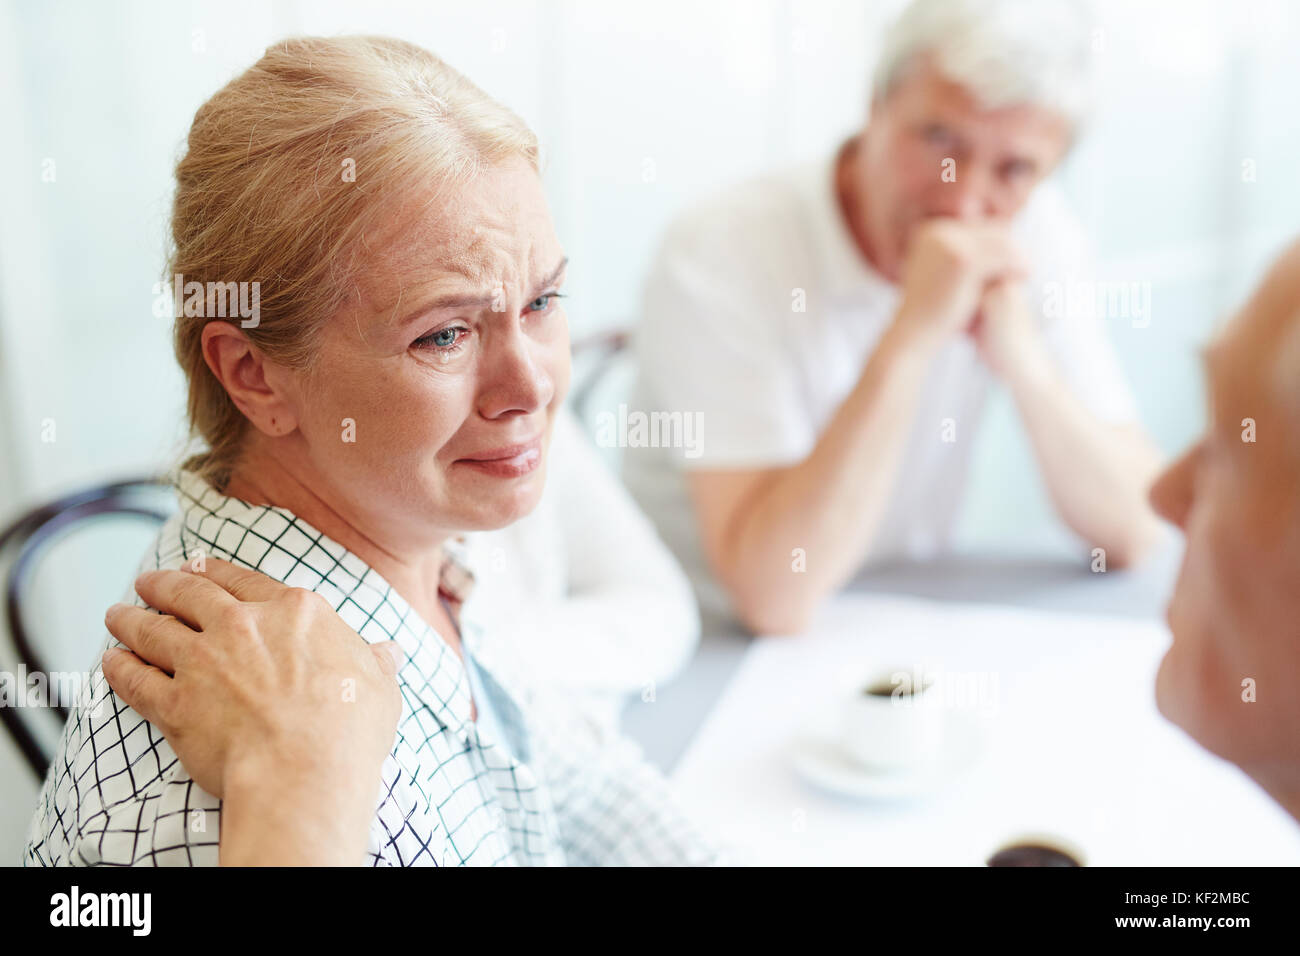 Taking care of crying friend Stock Photo